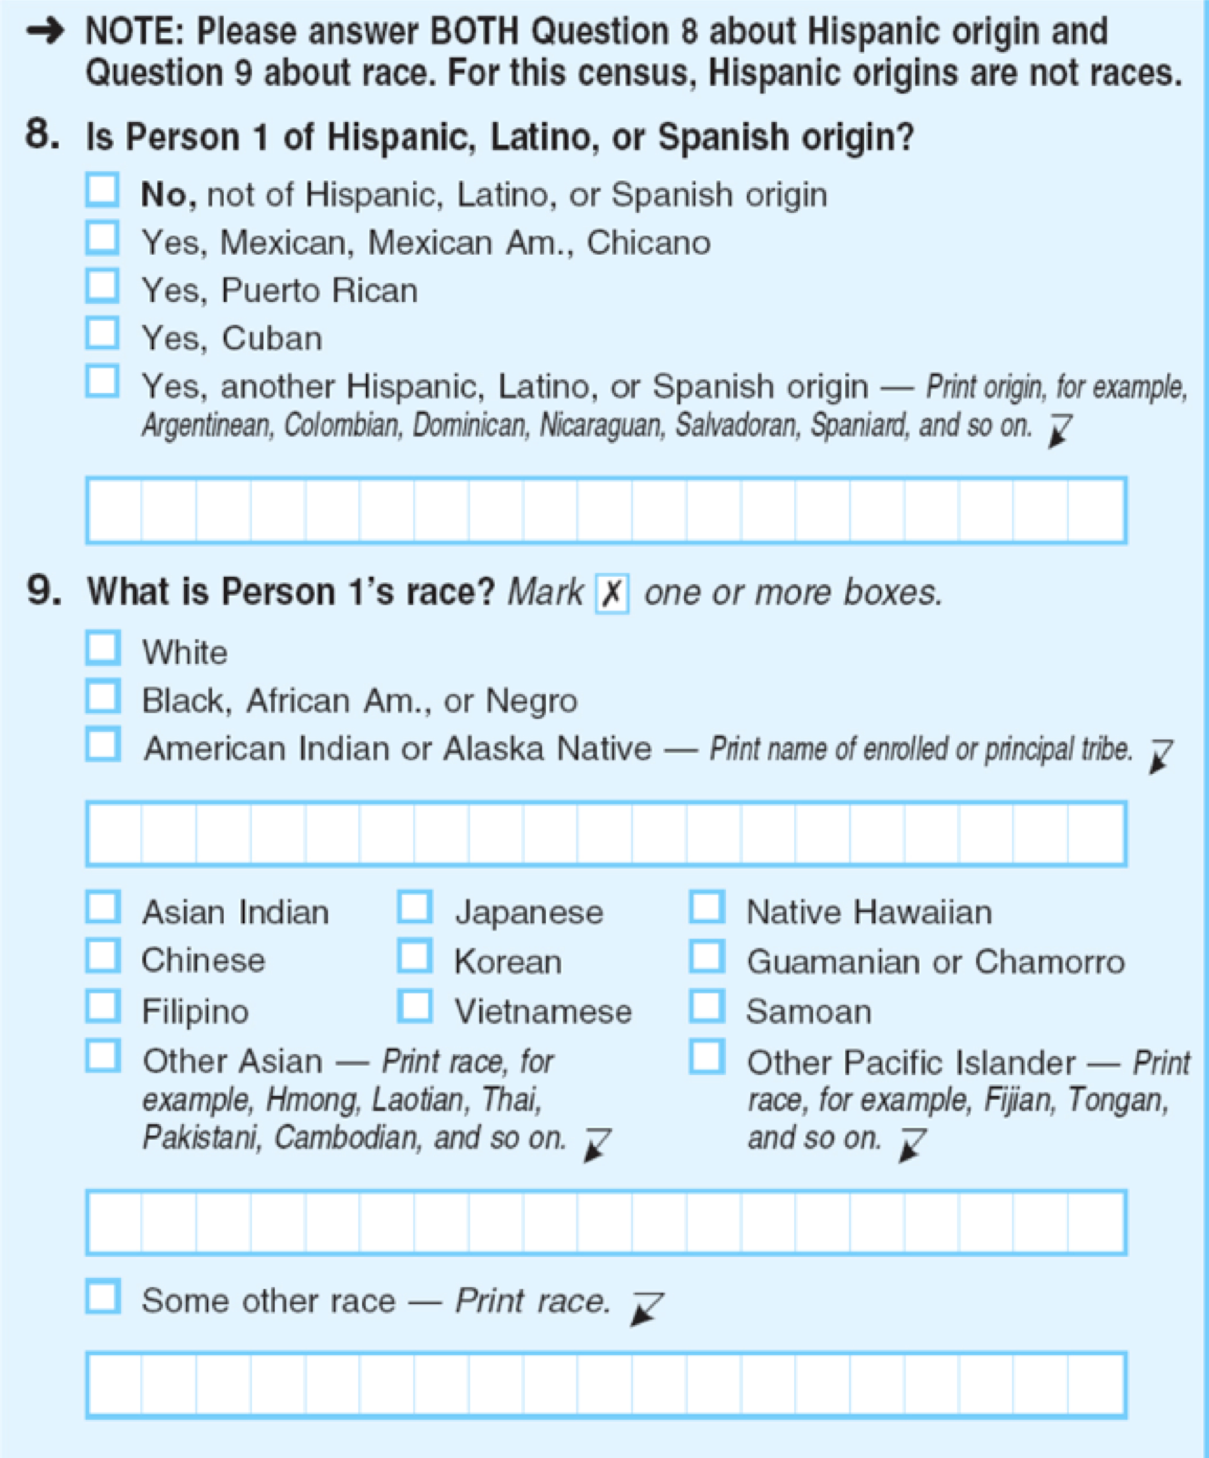 Image of a 2010 census form.